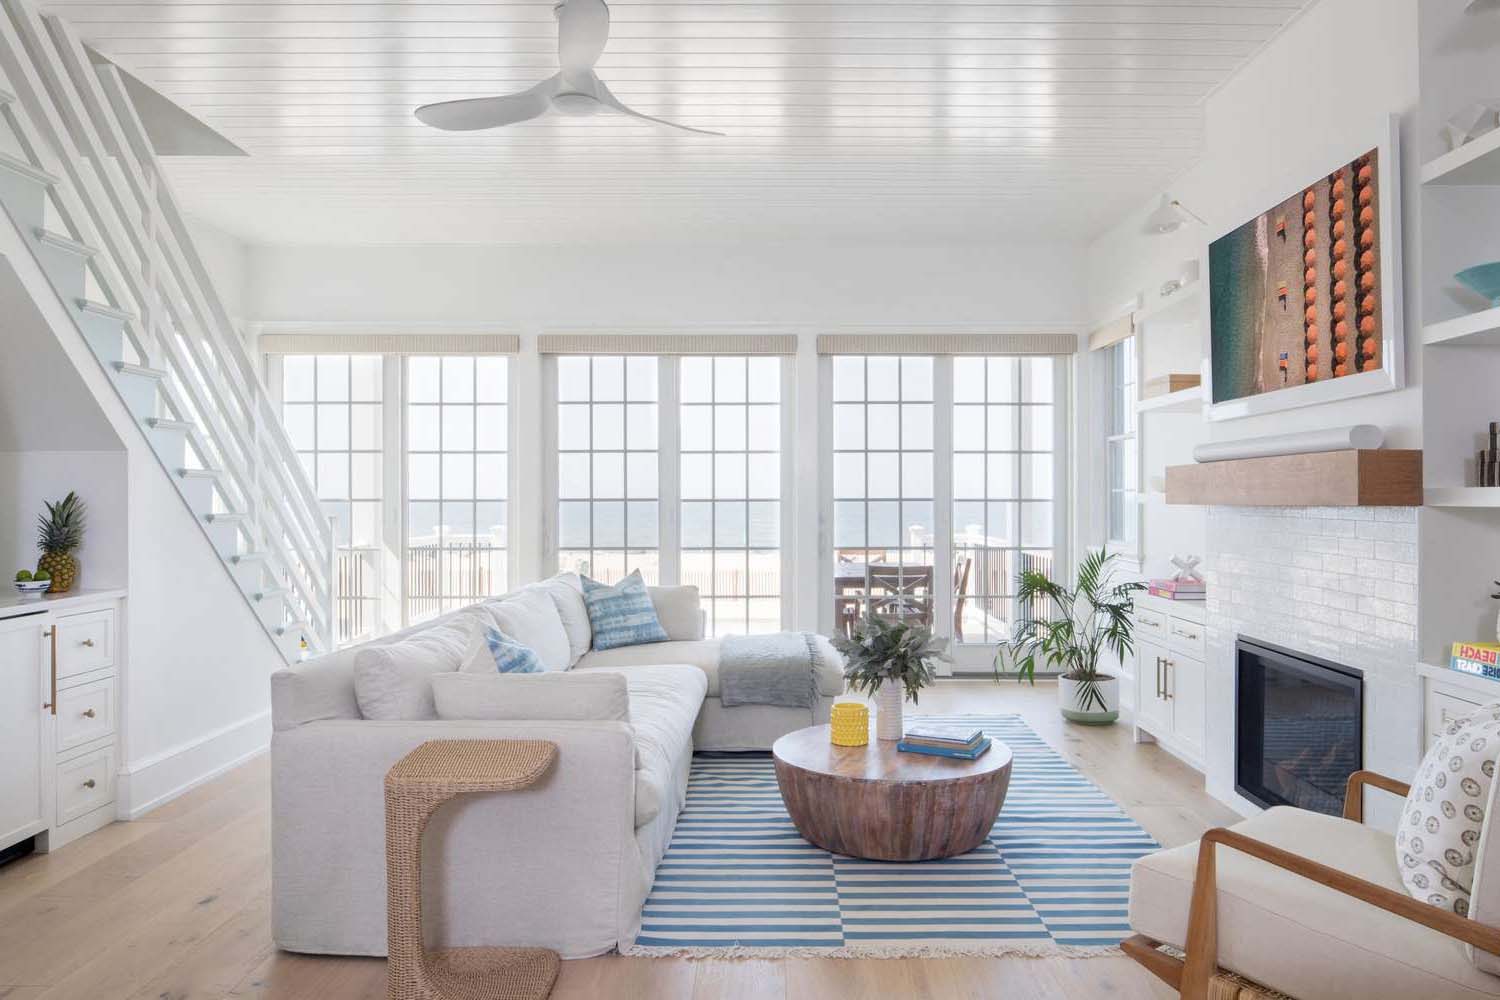 Bring the Serenity of the Seaside Into Your Home